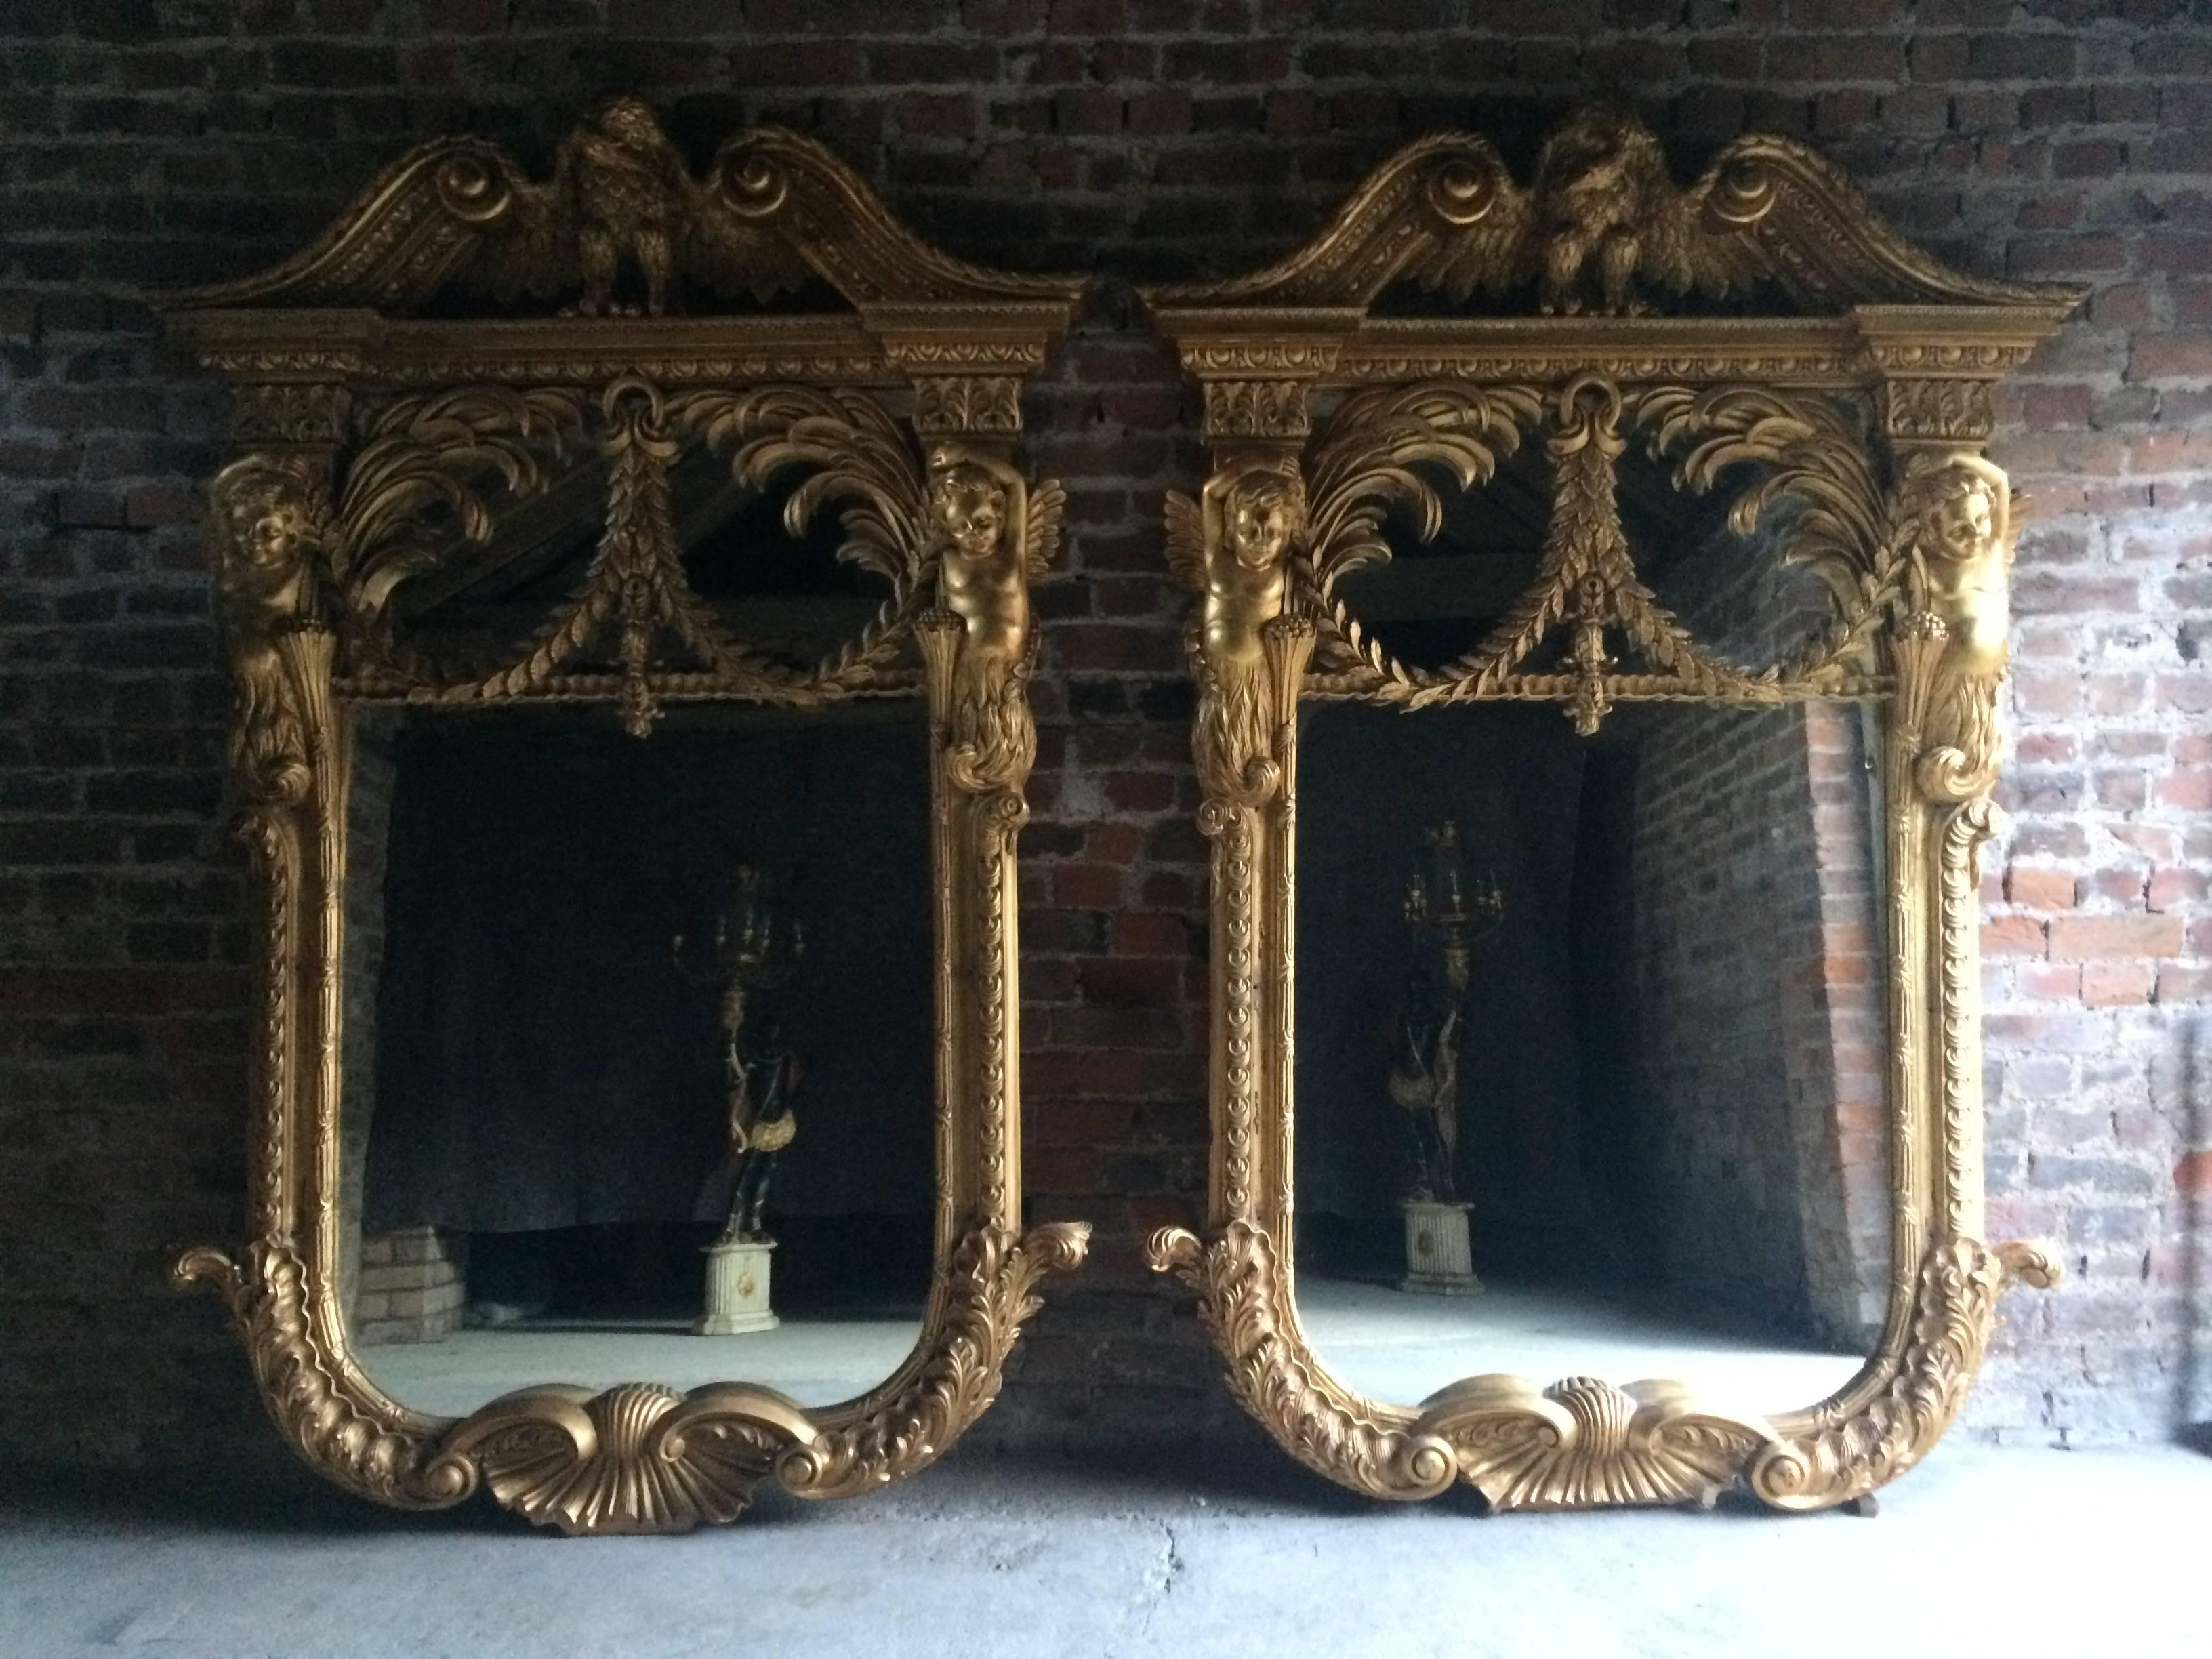 French Giltwood Wall Mirrors Pair of William Kent Design Very Large Rococo In Good Condition For Sale In Longdon, Tewkesbury